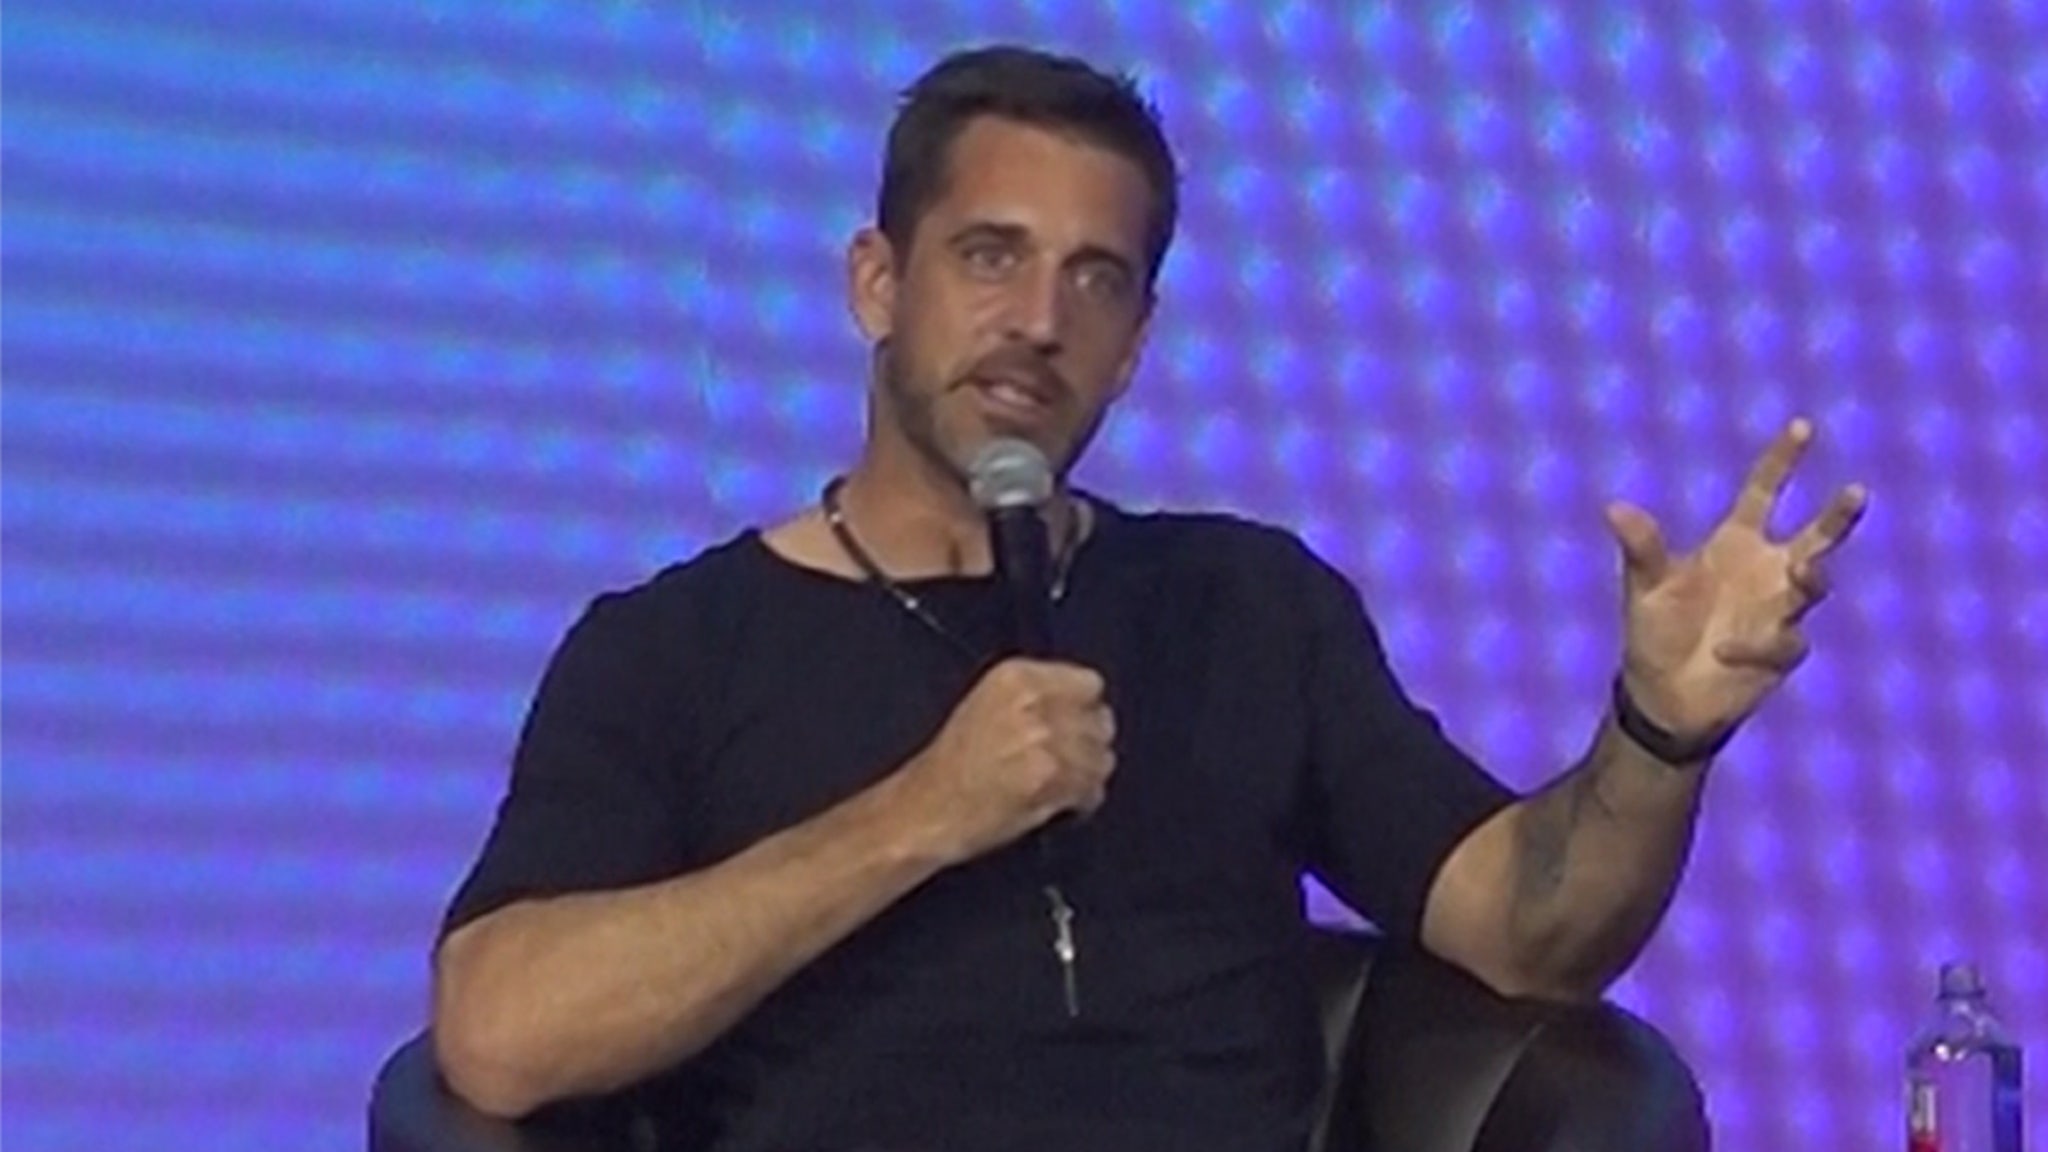 Aaron Rodgers Pushes for Psilocybin Legalization at Psychedelics Conference